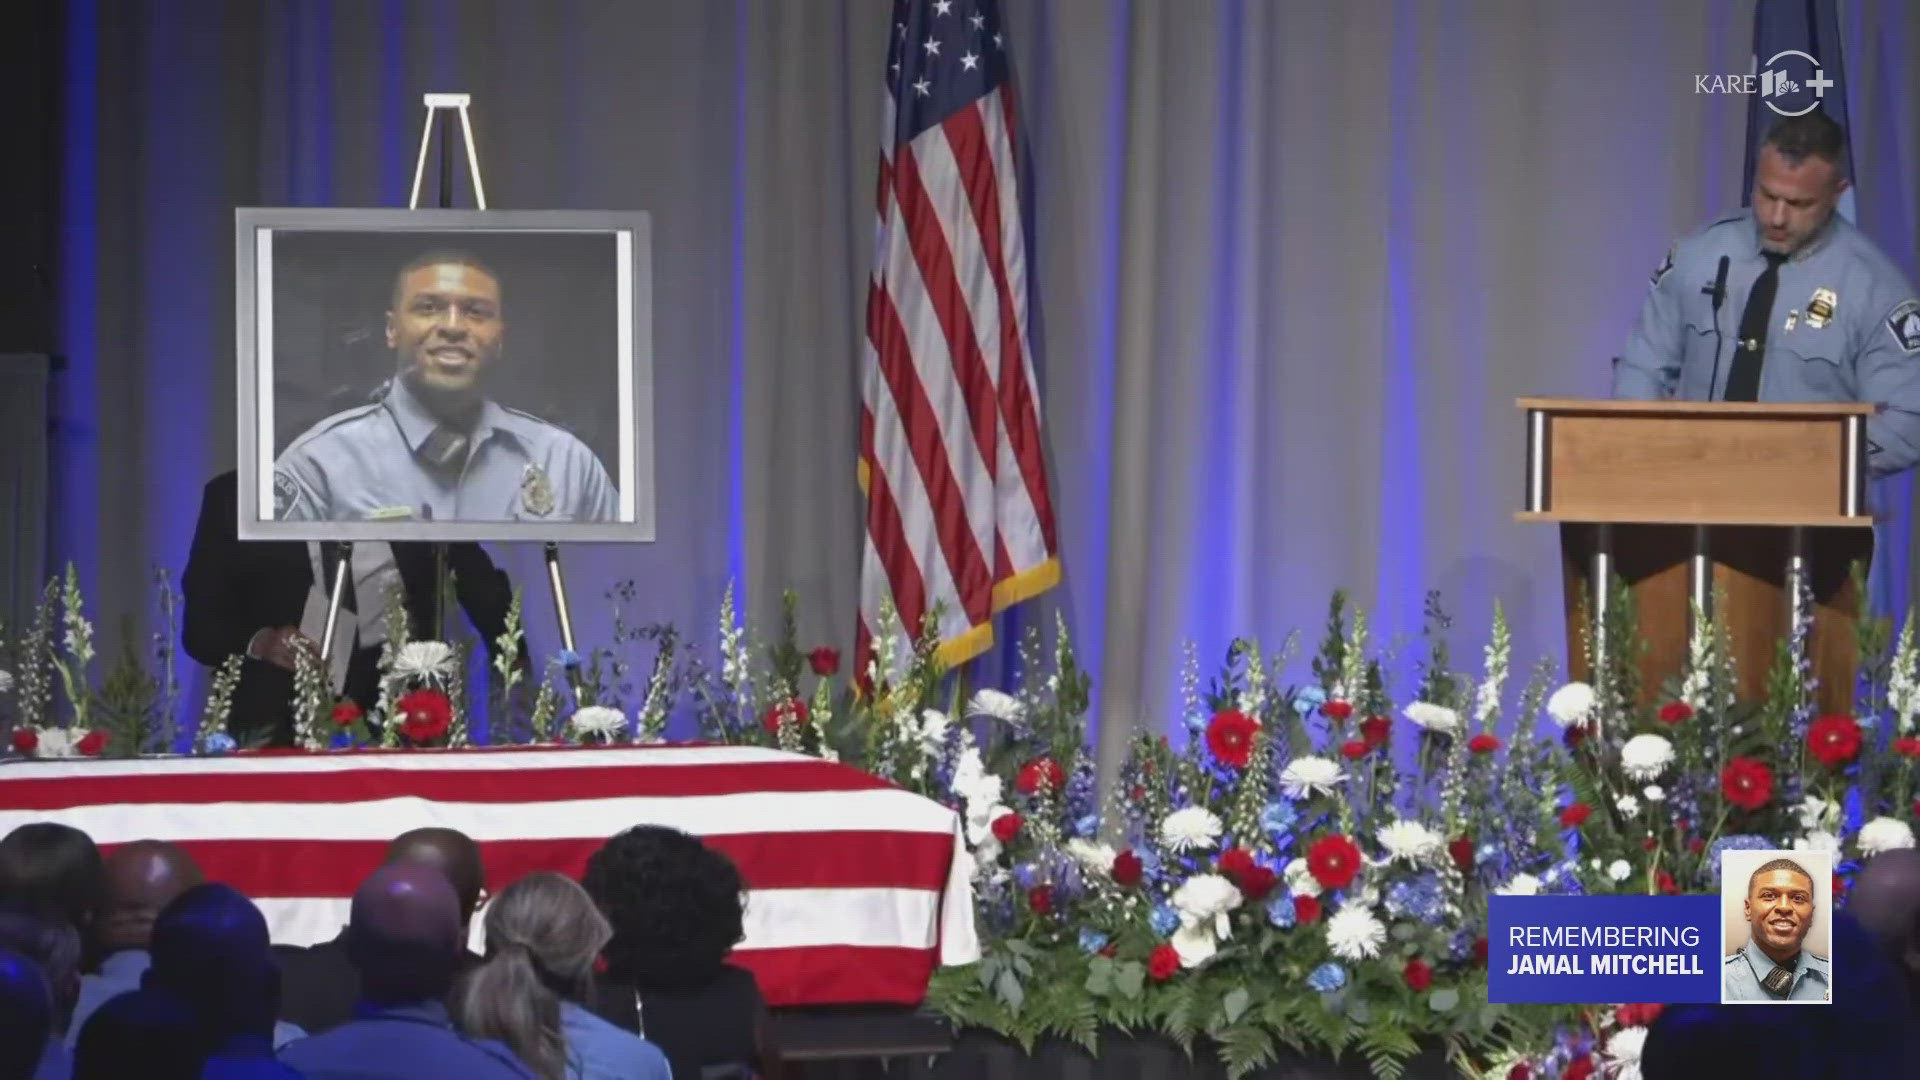 Minneapolis Police Chief Brian O'Hara spoke about Officer Jamal Mitchell's outstanding service to MPD.